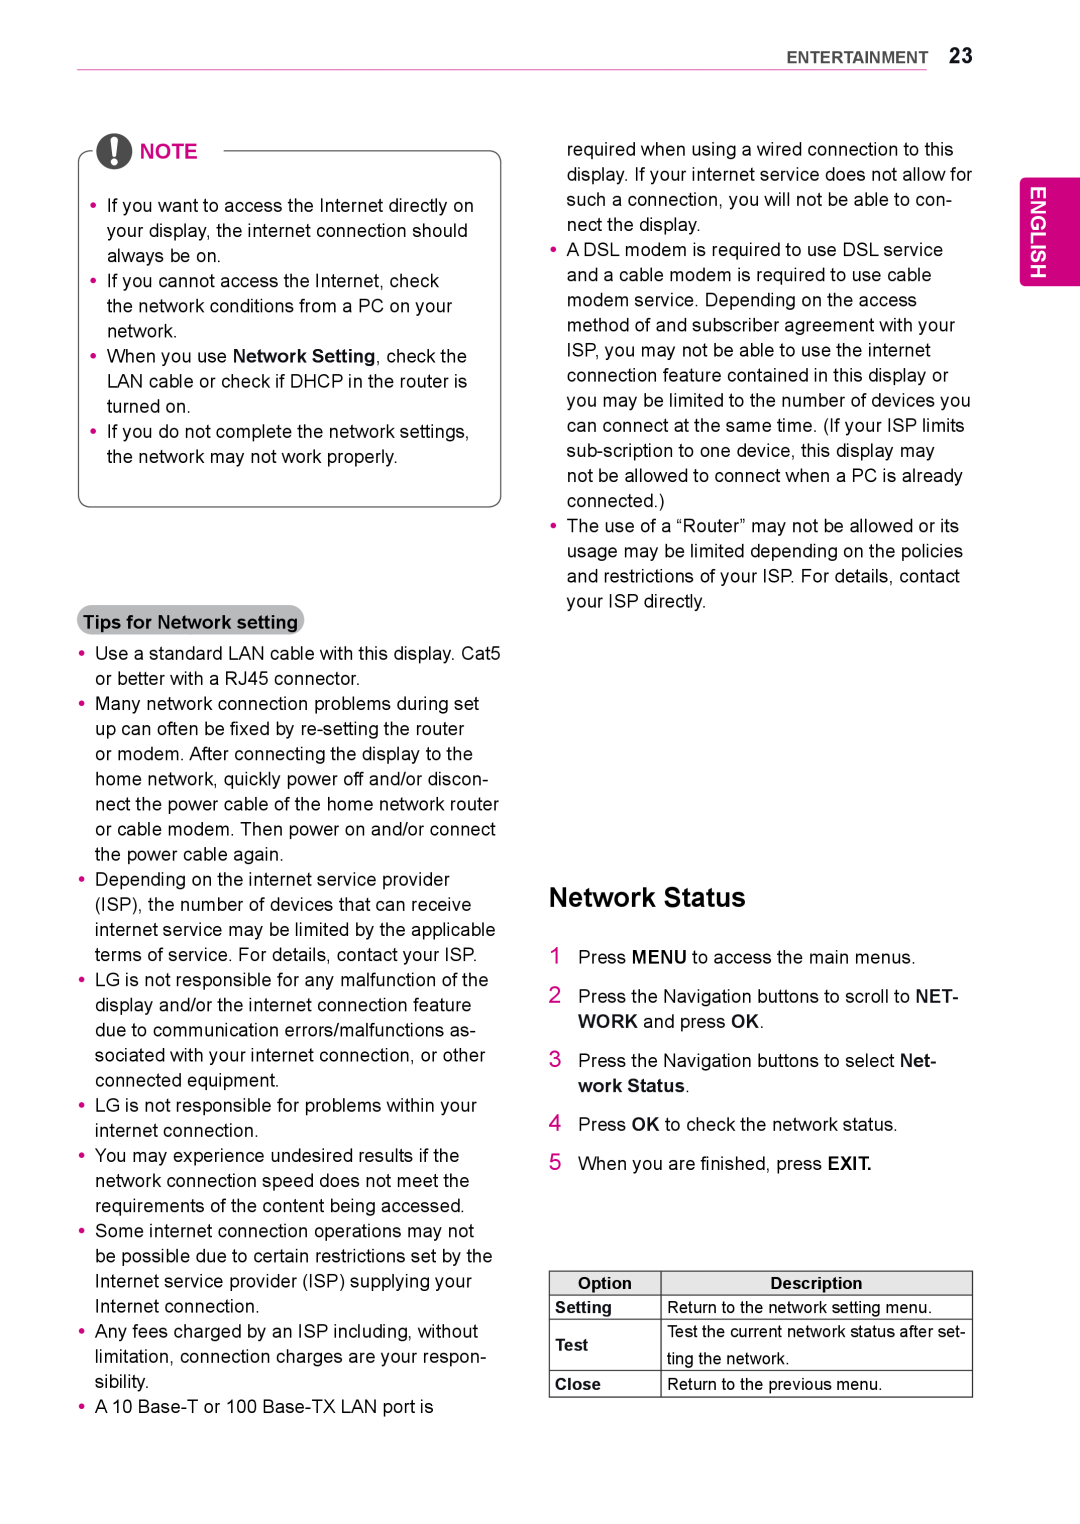 LG Electronics 55WS10, 42WS10, 47WS10 owner manual Network Status, English, Tips for Network setting 